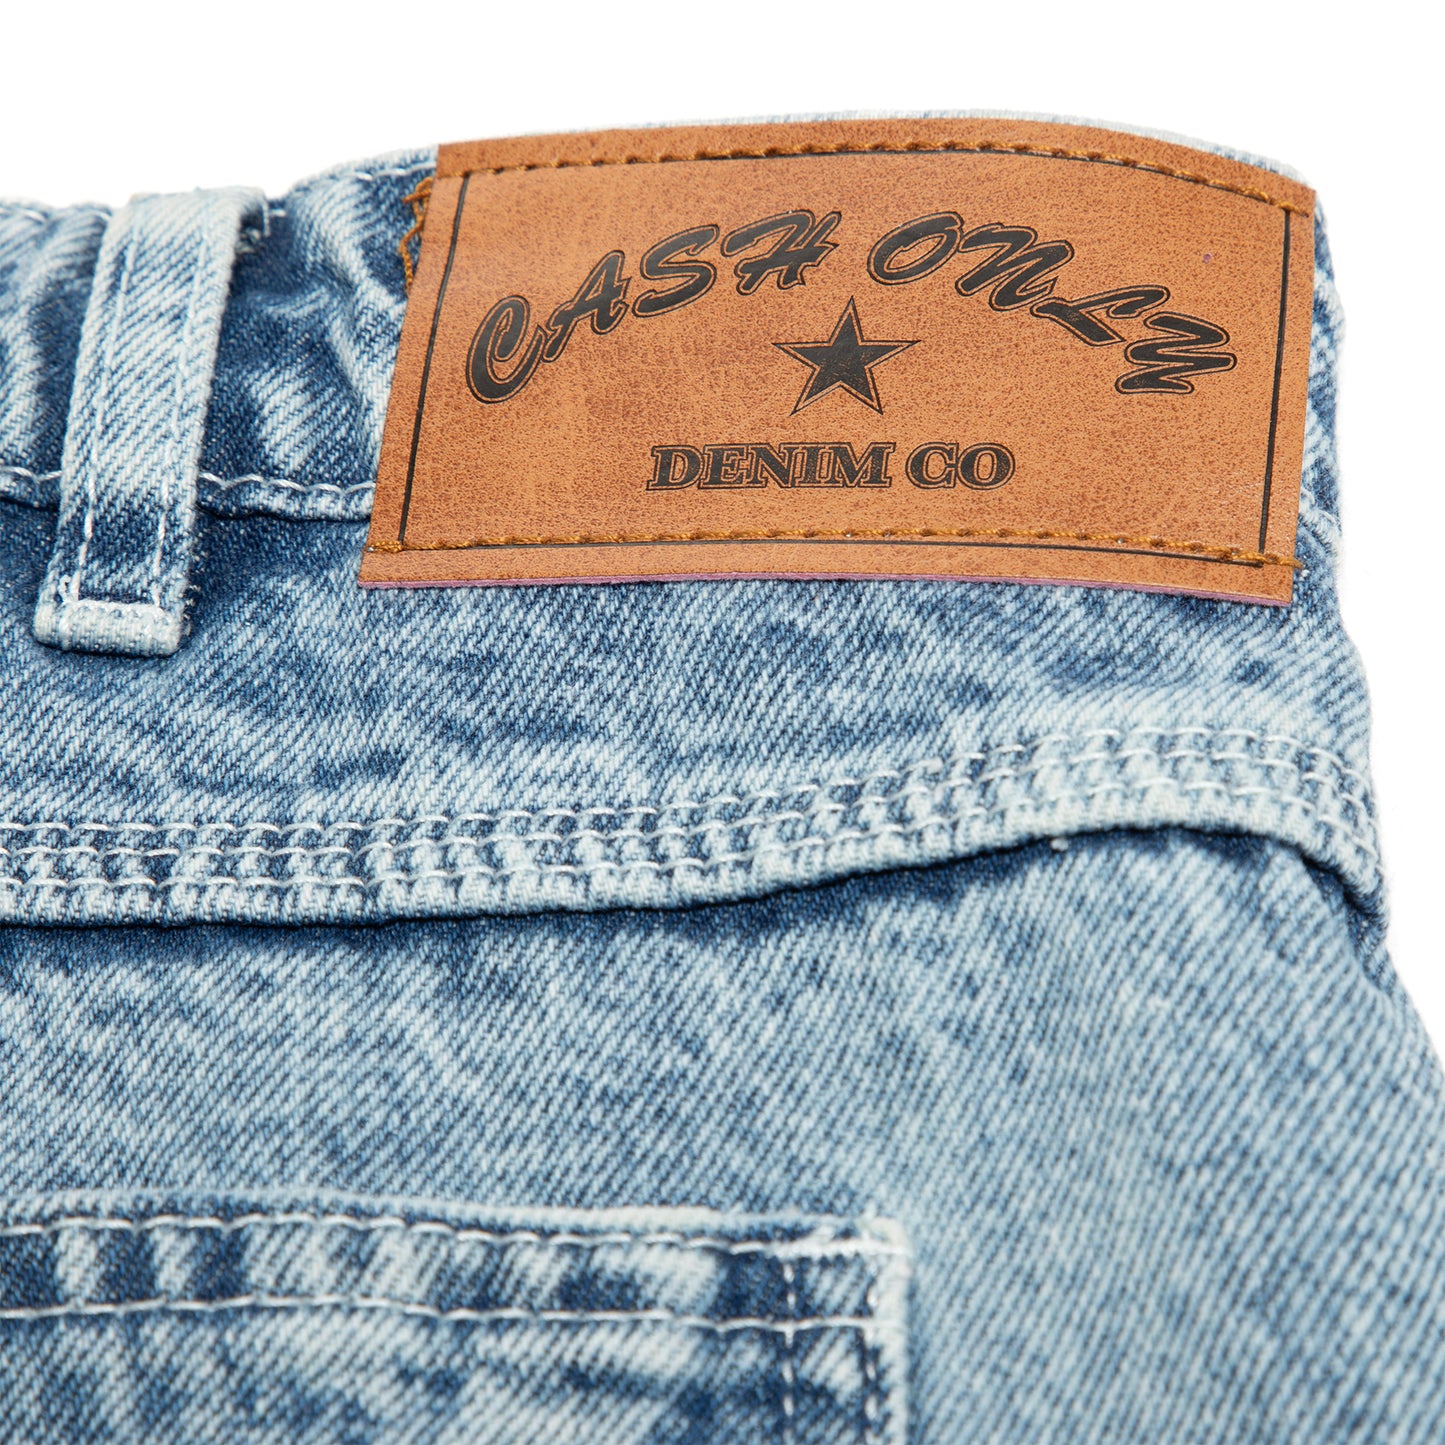 Cash Only All Star Baggy Denim Jeans (Faded Indigo)